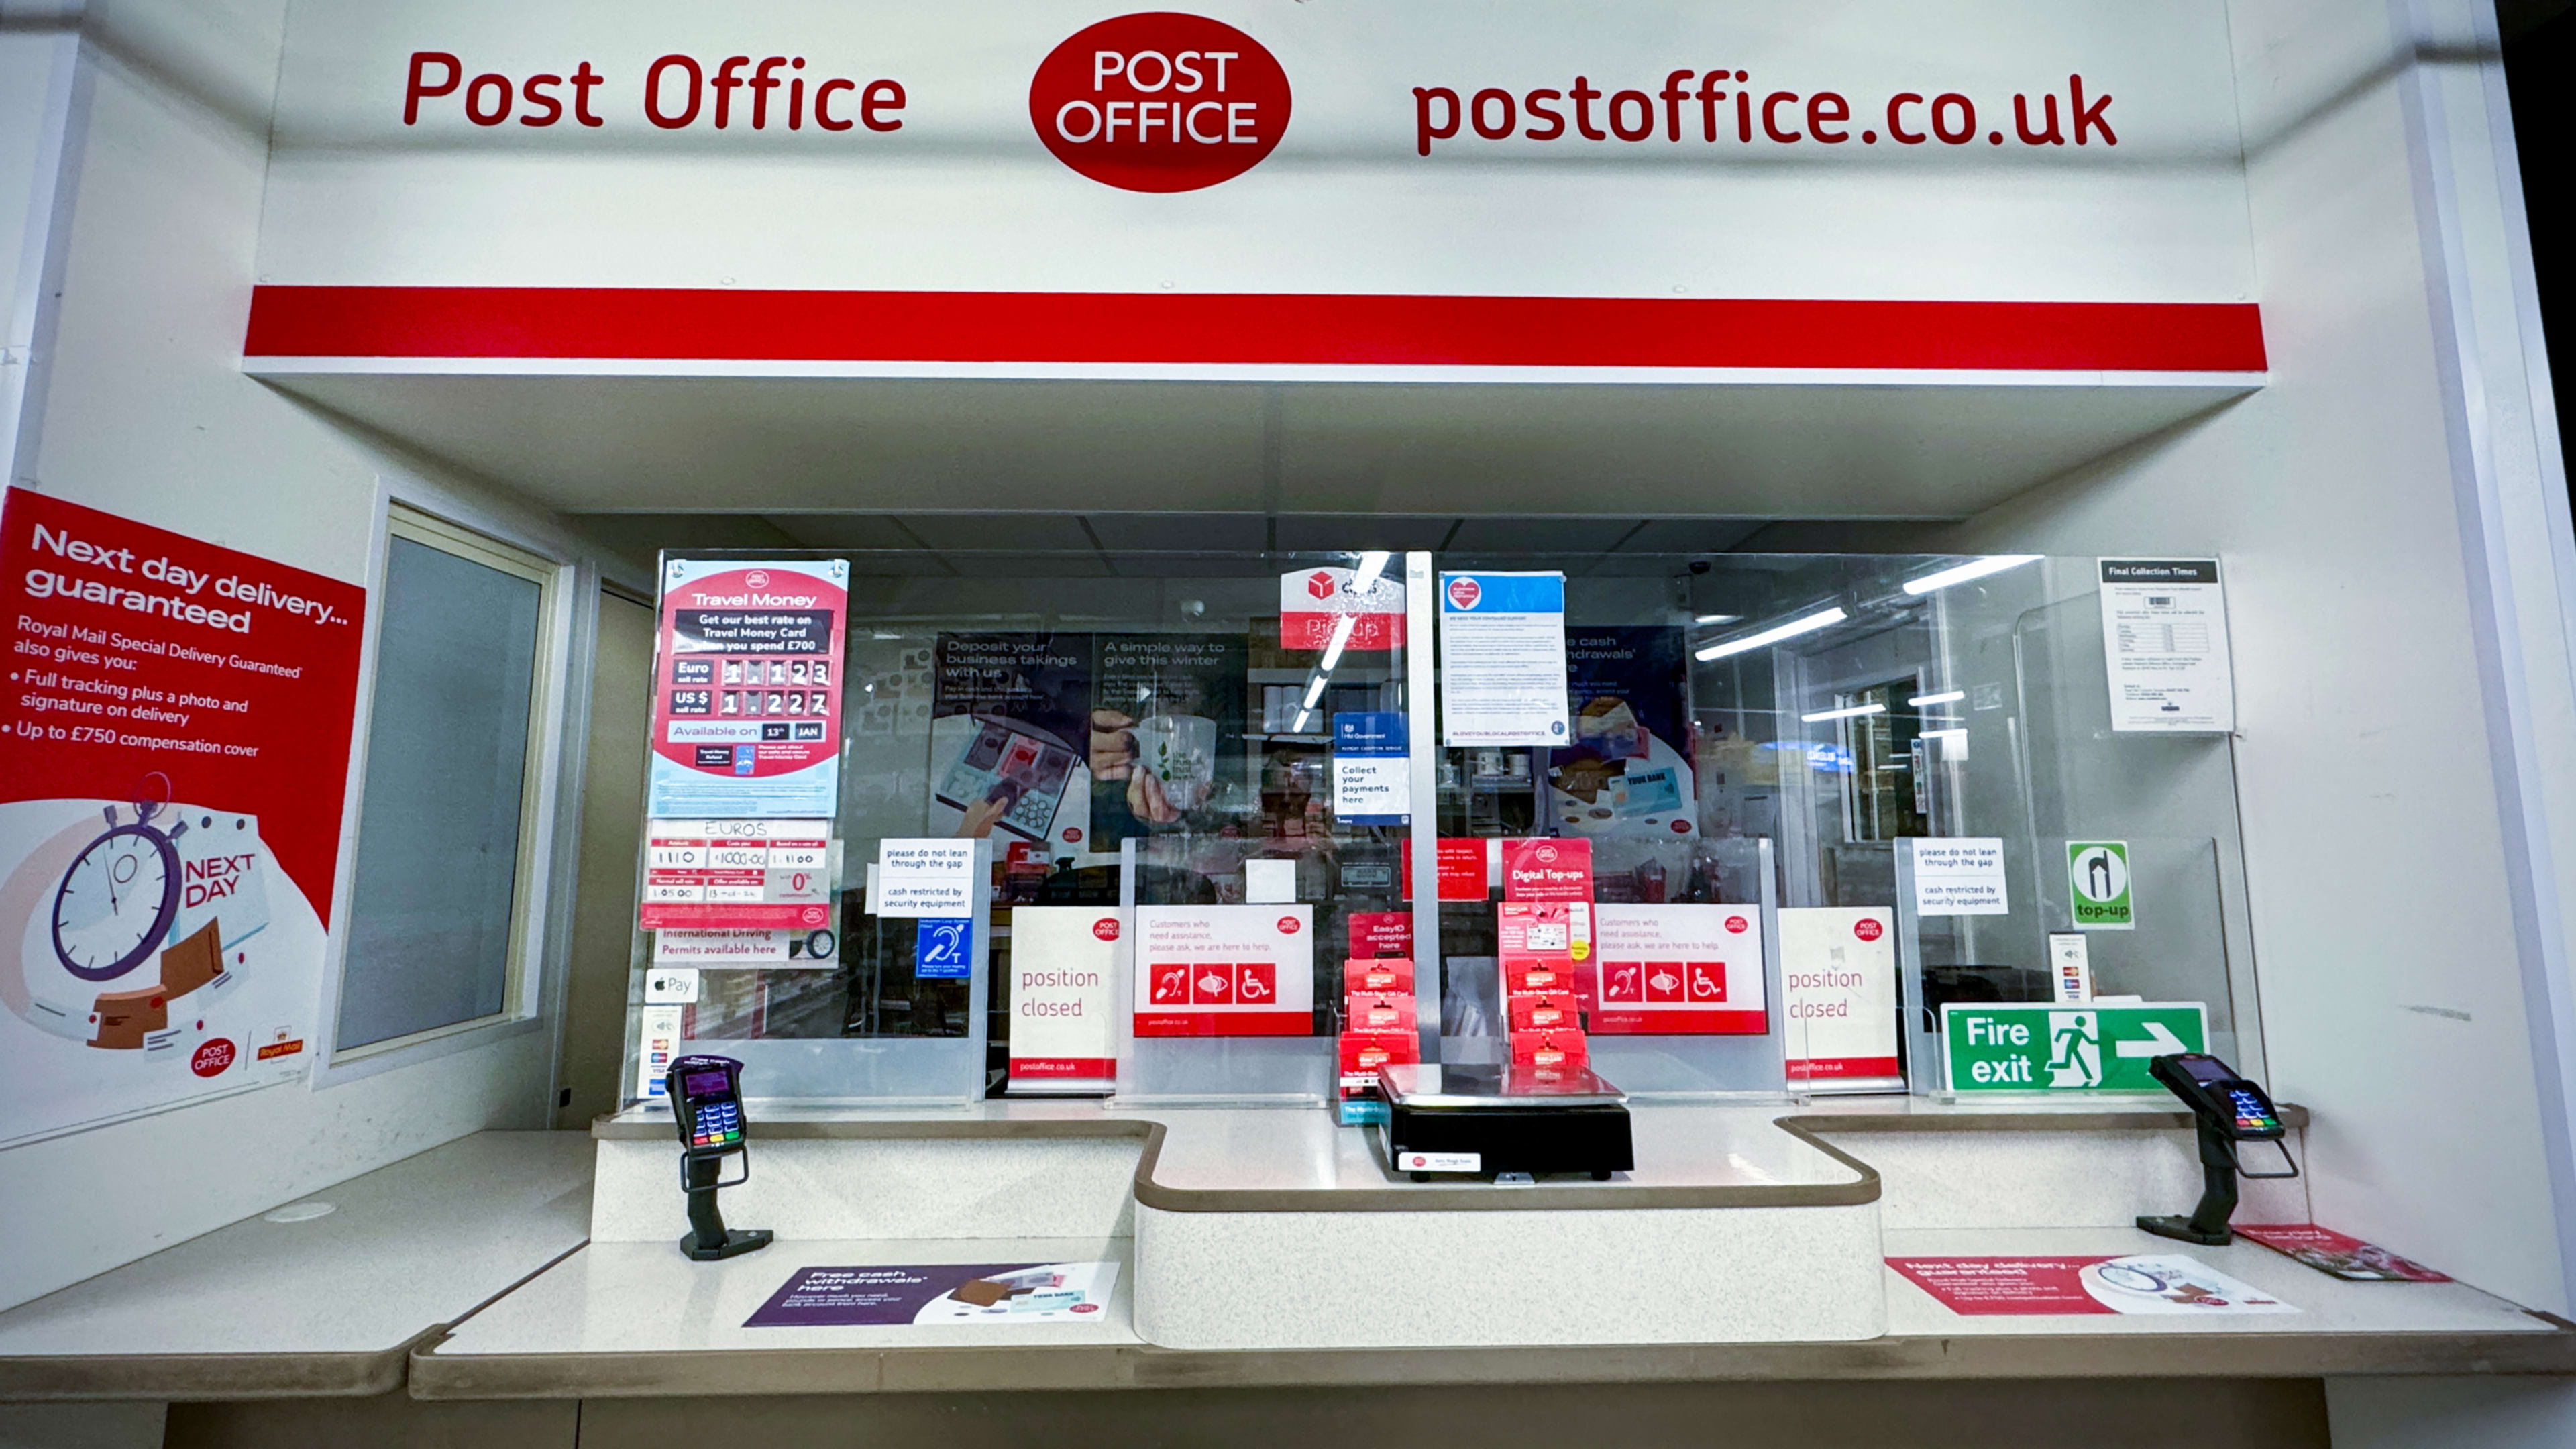 What the hell is going on with the U.K. Post Office?